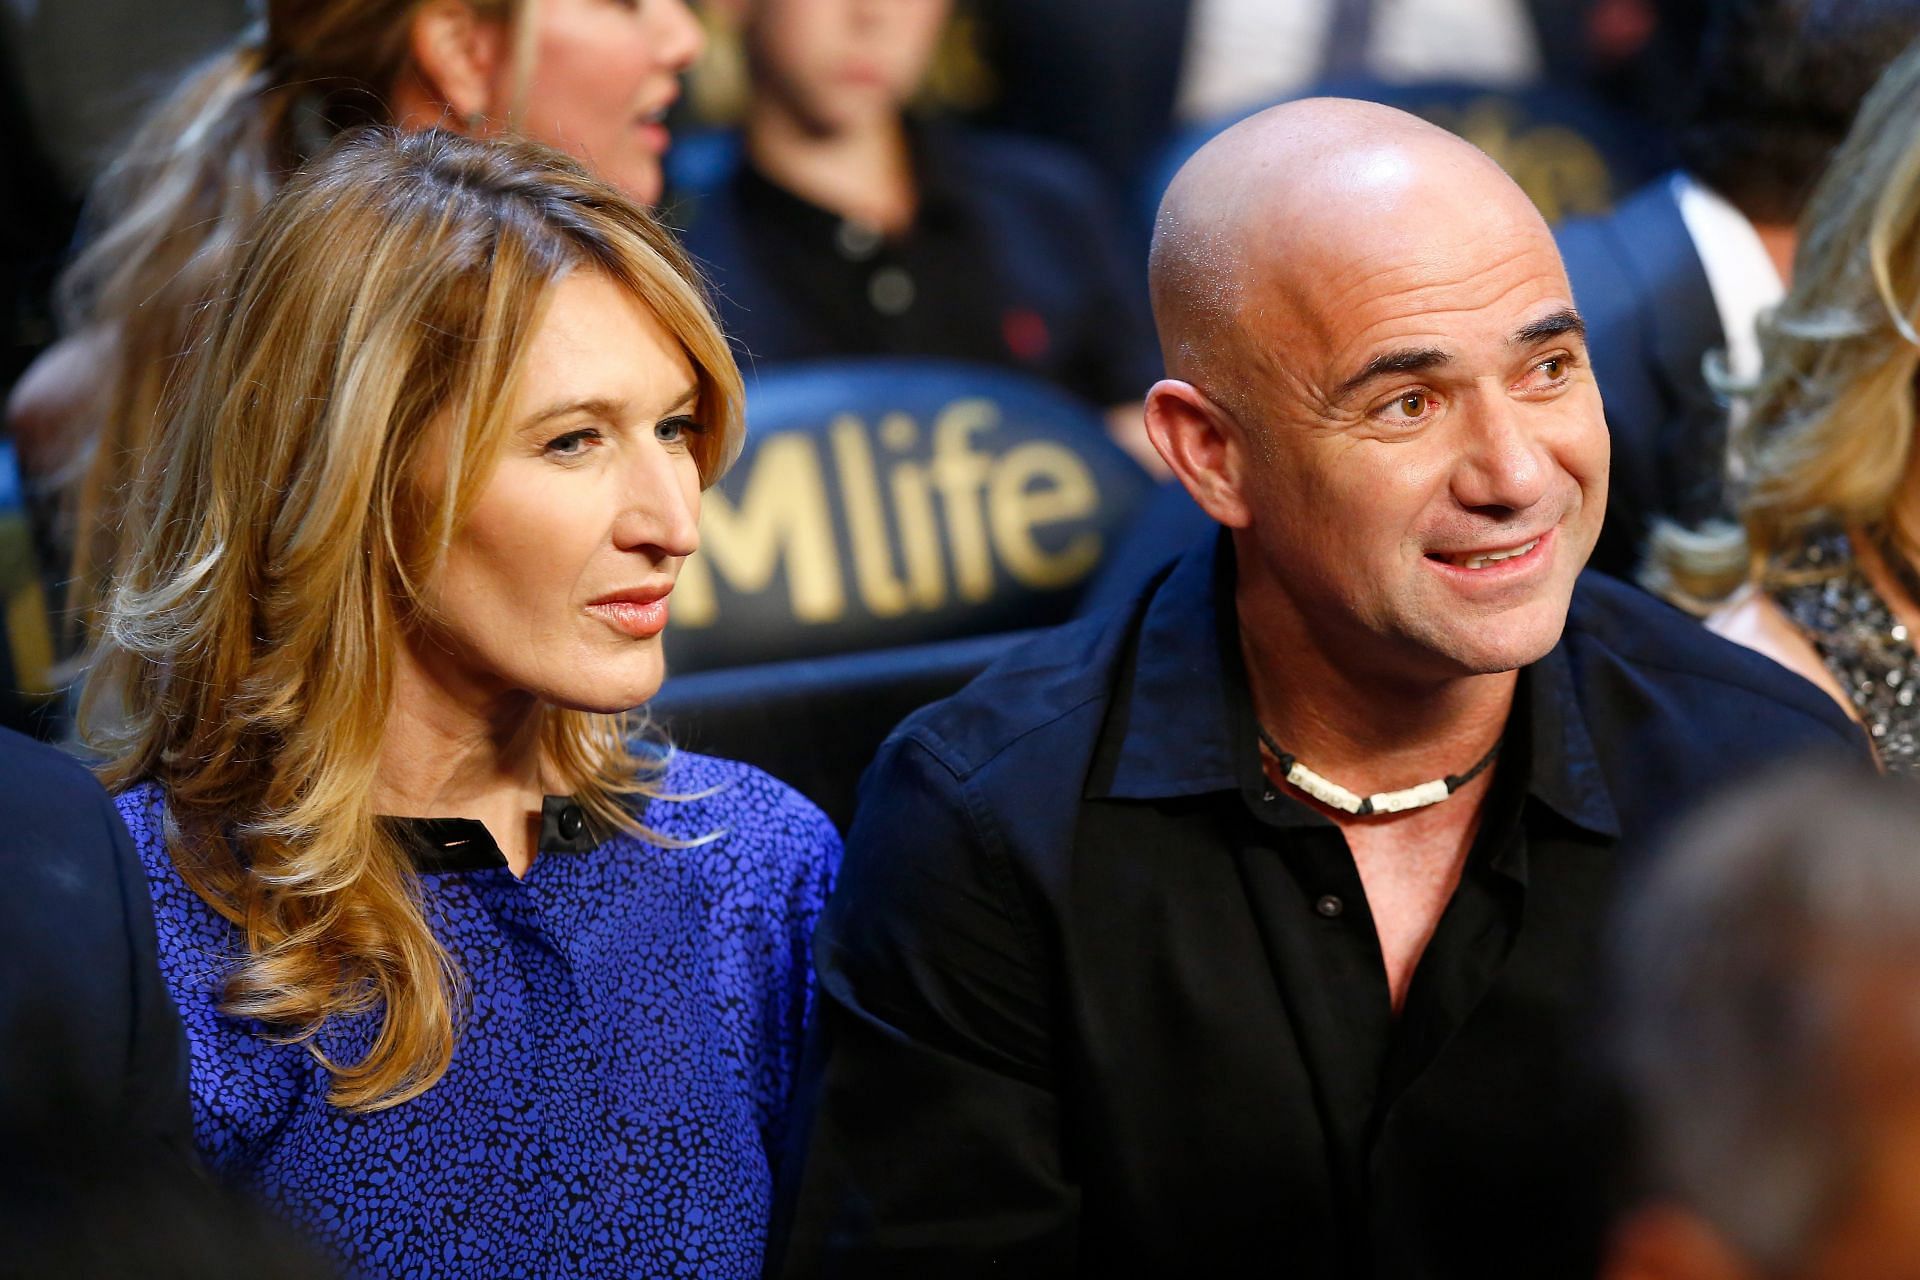 Steffi Graf with Andre Agassi in 2015